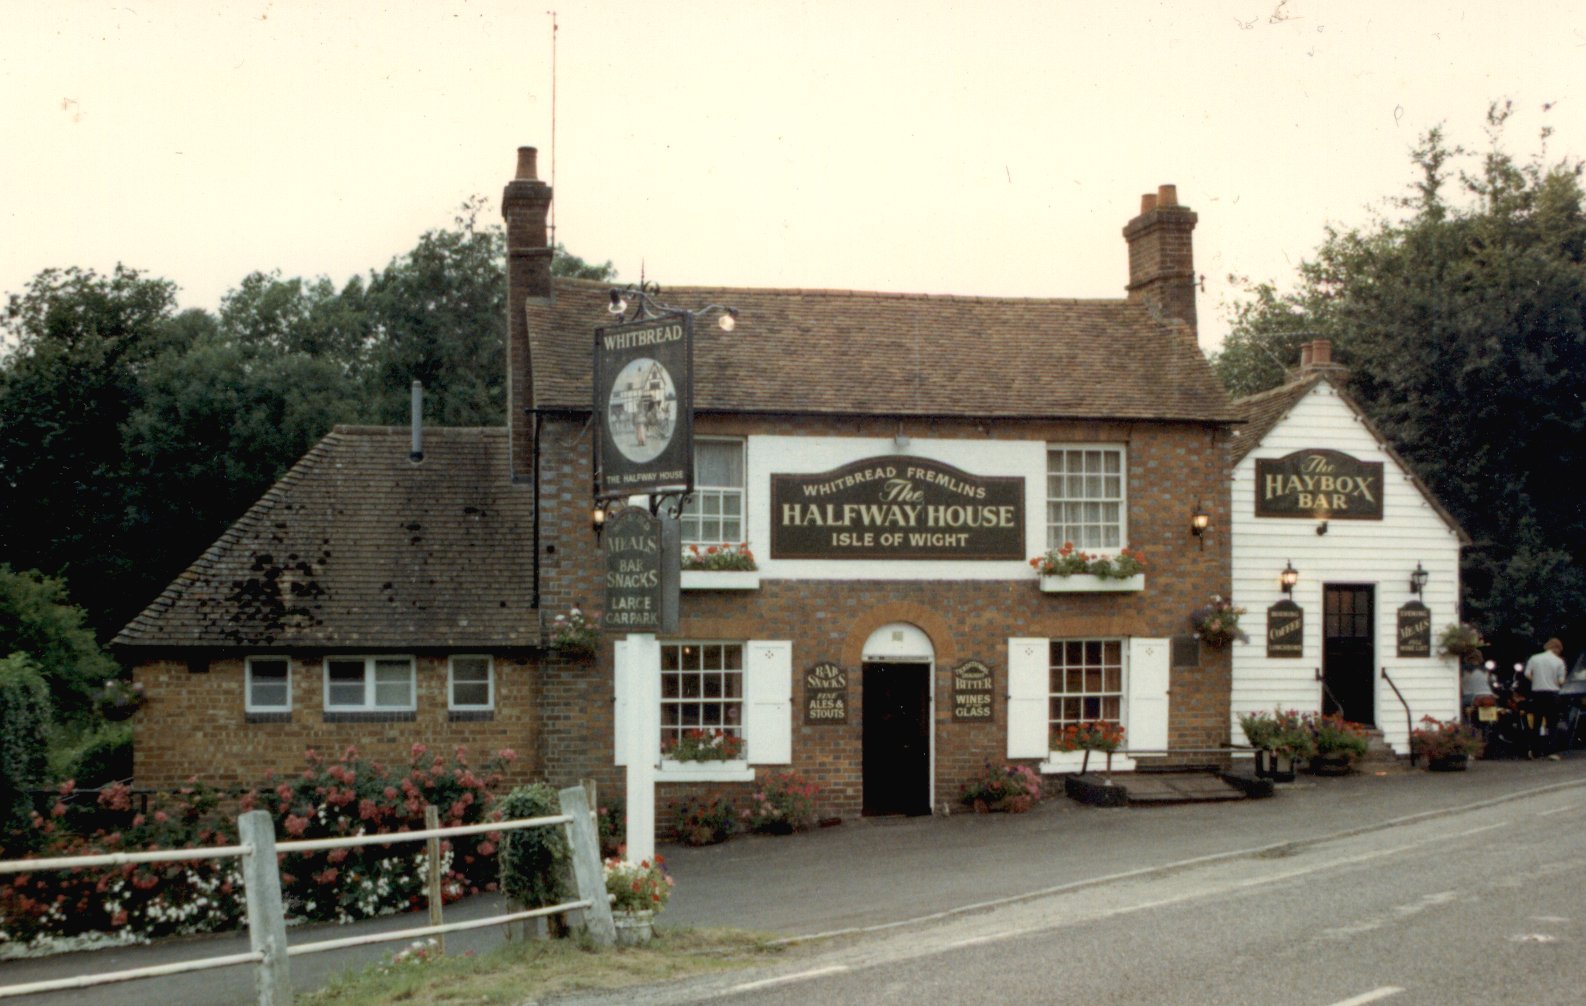 Chatfield Des Halfway House Brenchley Kent.jpg